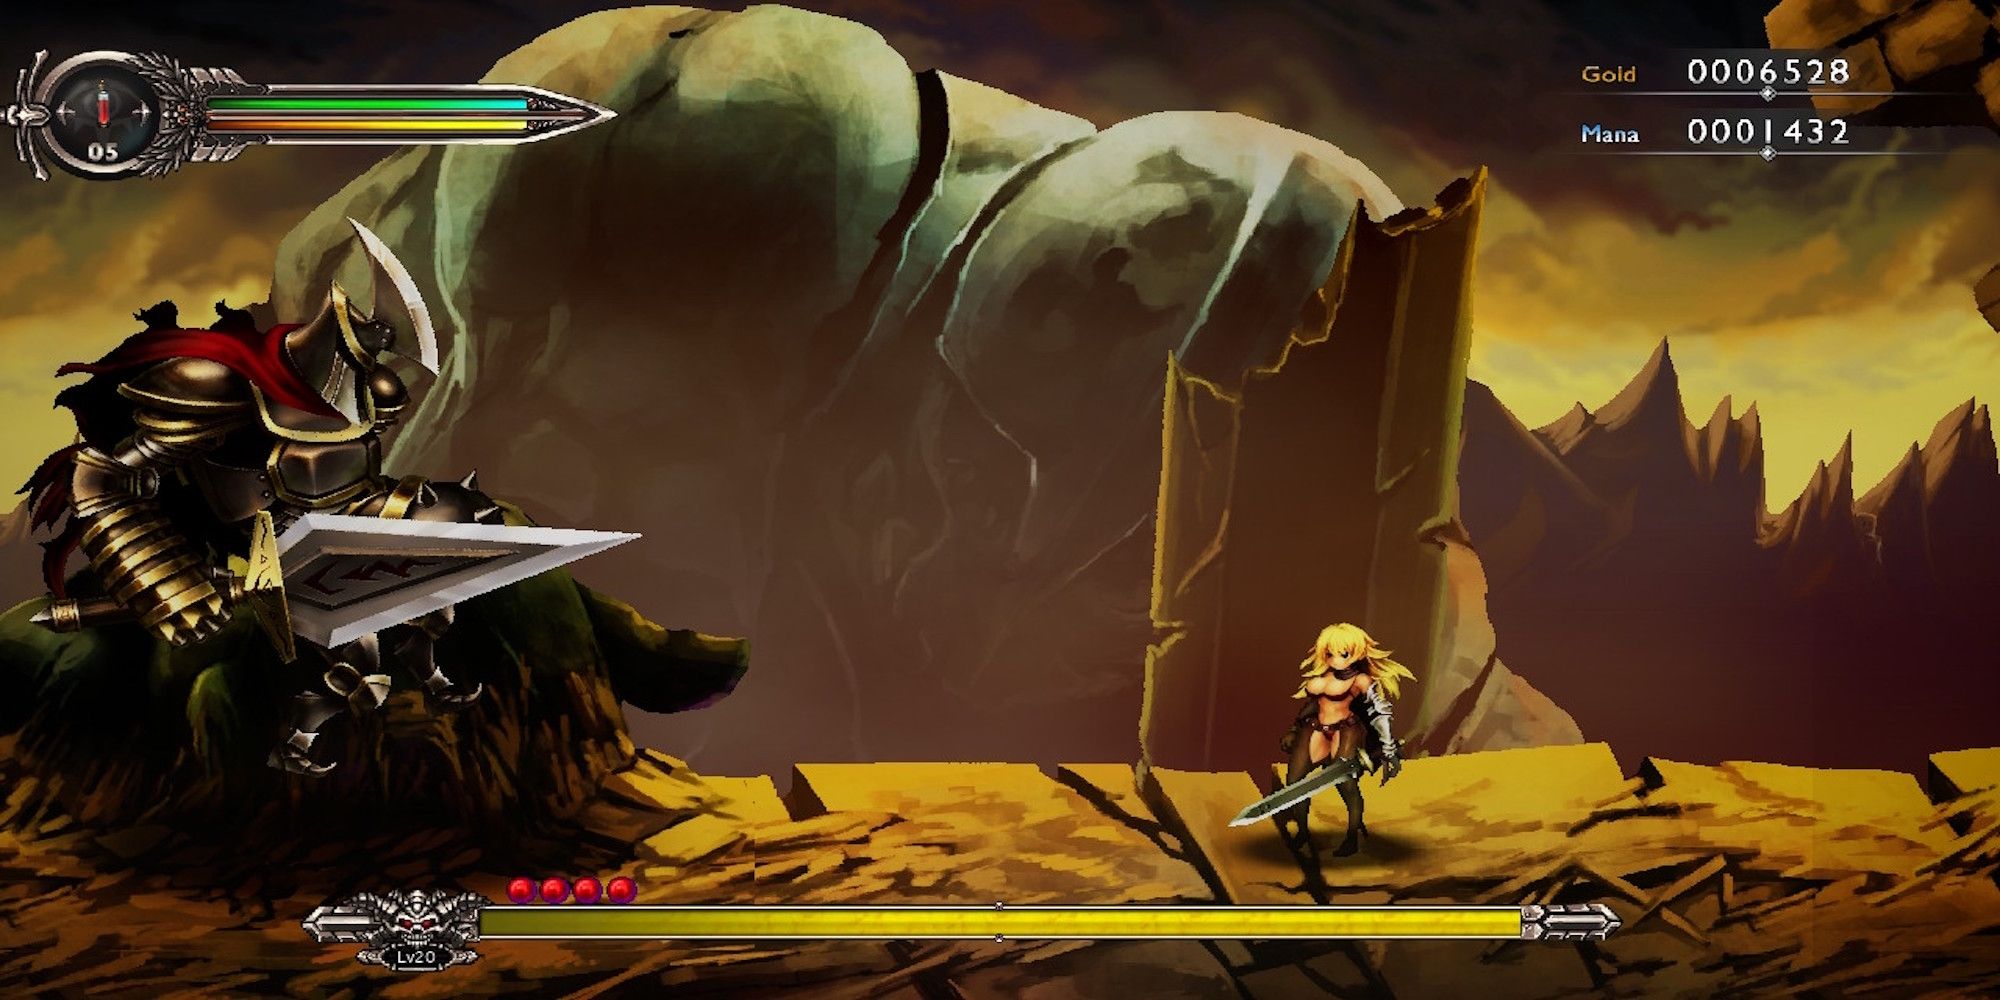 Fight a boss in Sword of the Vagrant 